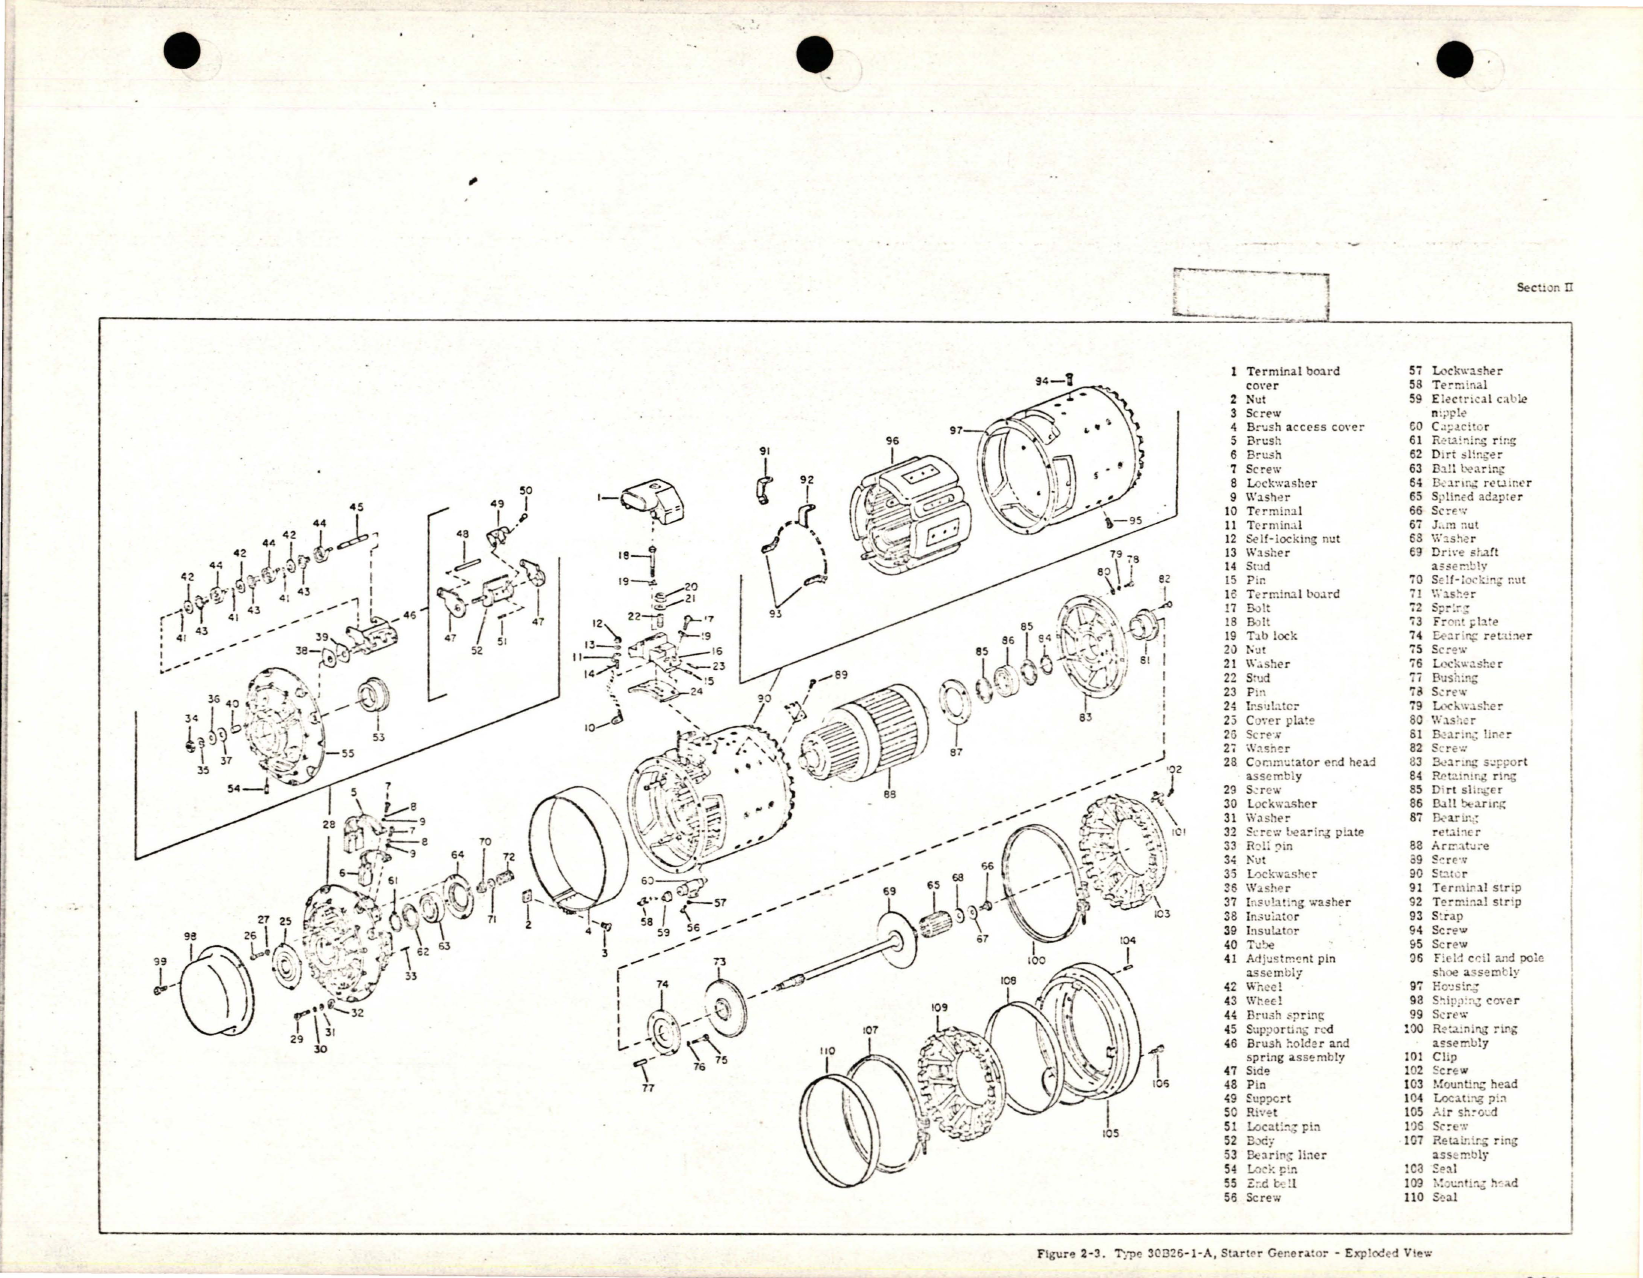 Sample page 7 from AirCorps Library document: Overhaul for Starter Generator - Type 30B26-1-A